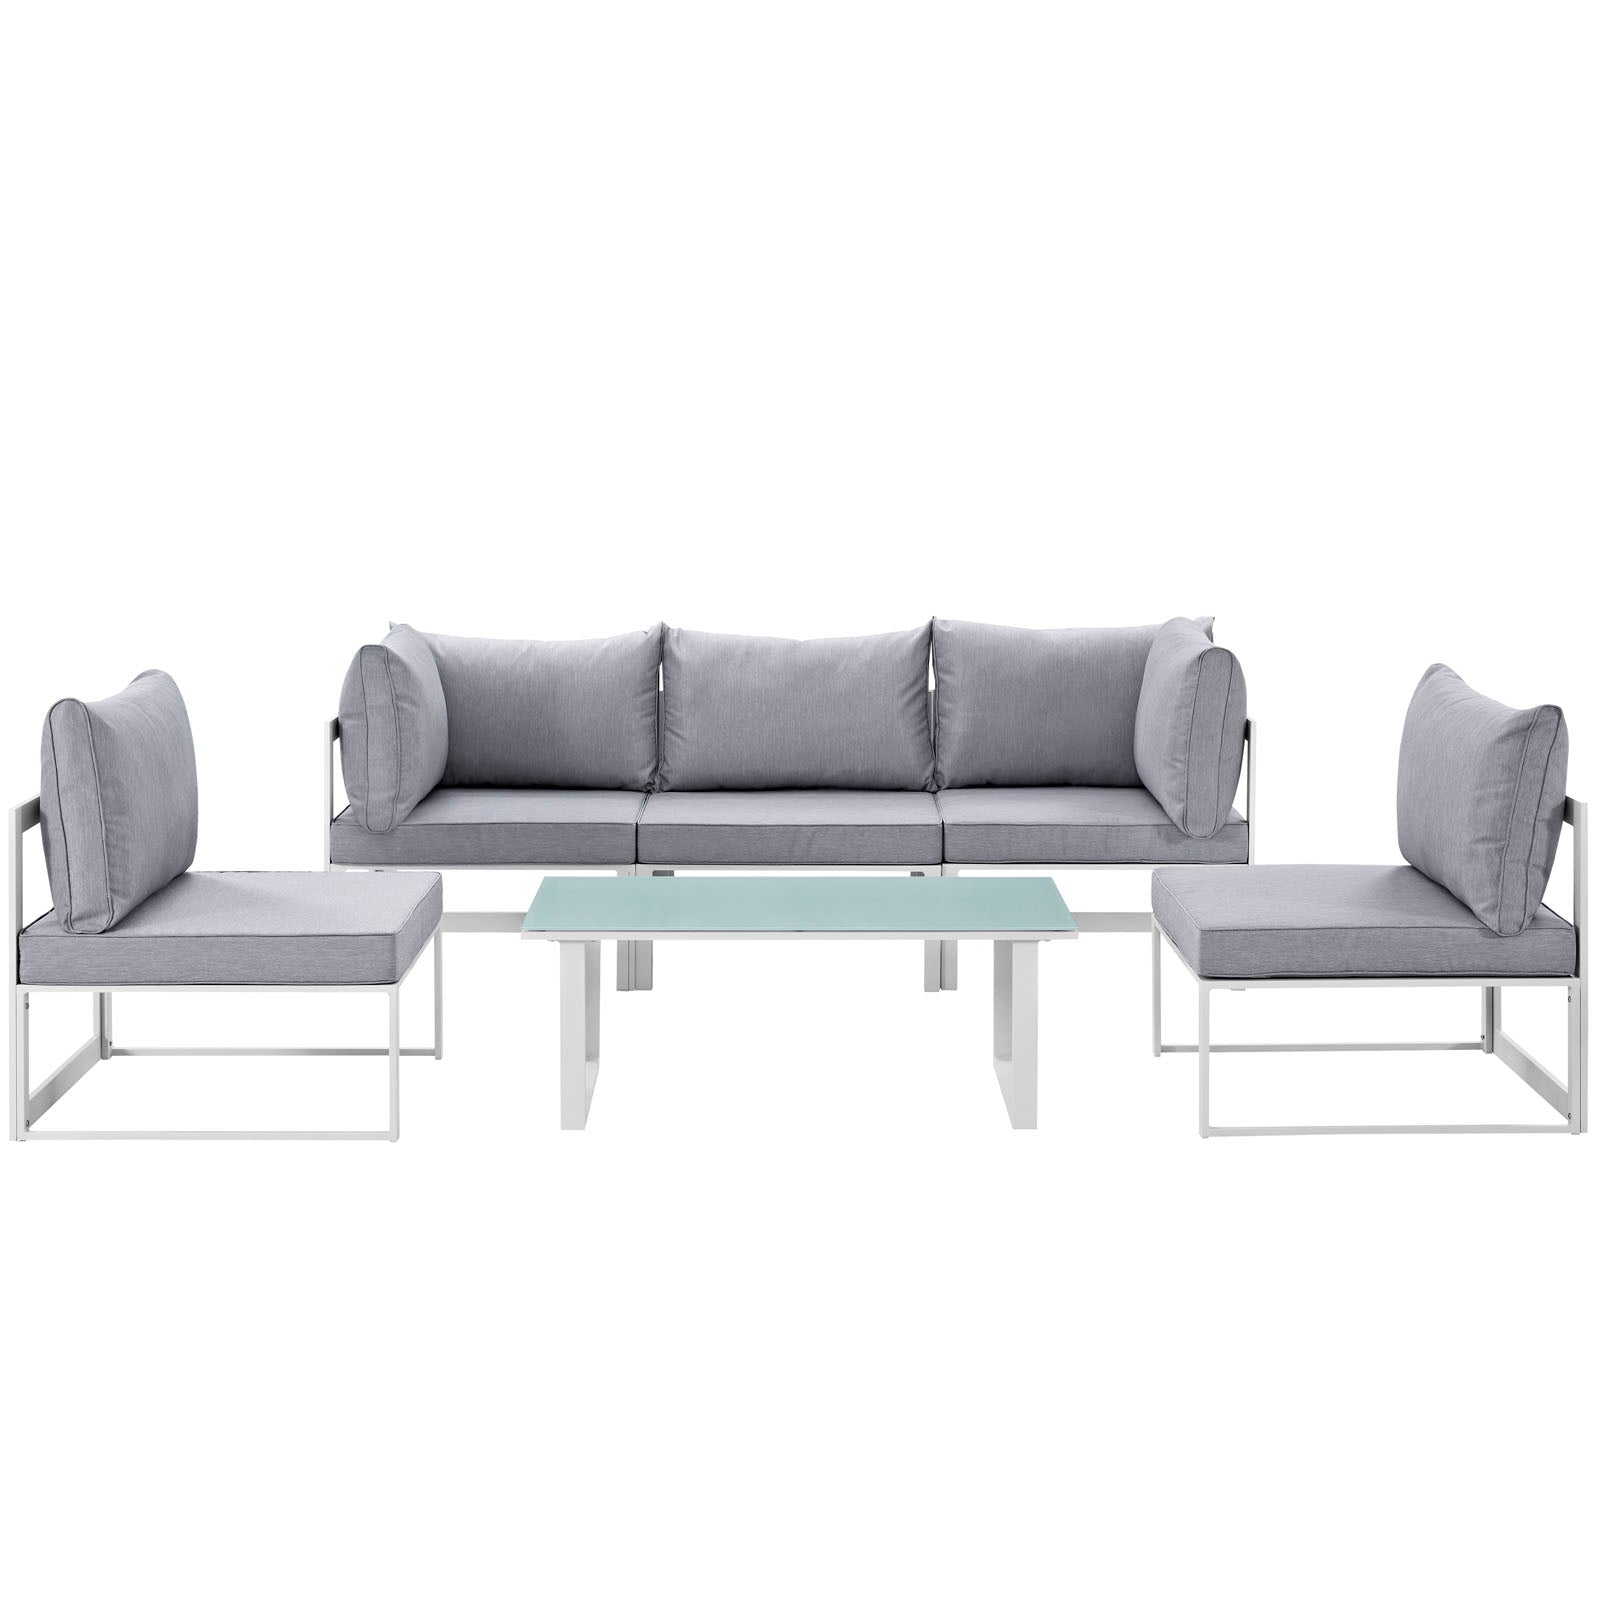 Fortuna 6 Piece Outdoor Patio Sectional Sofa Set-Outdoor Set-Modway-Wall2Wall Furnishings